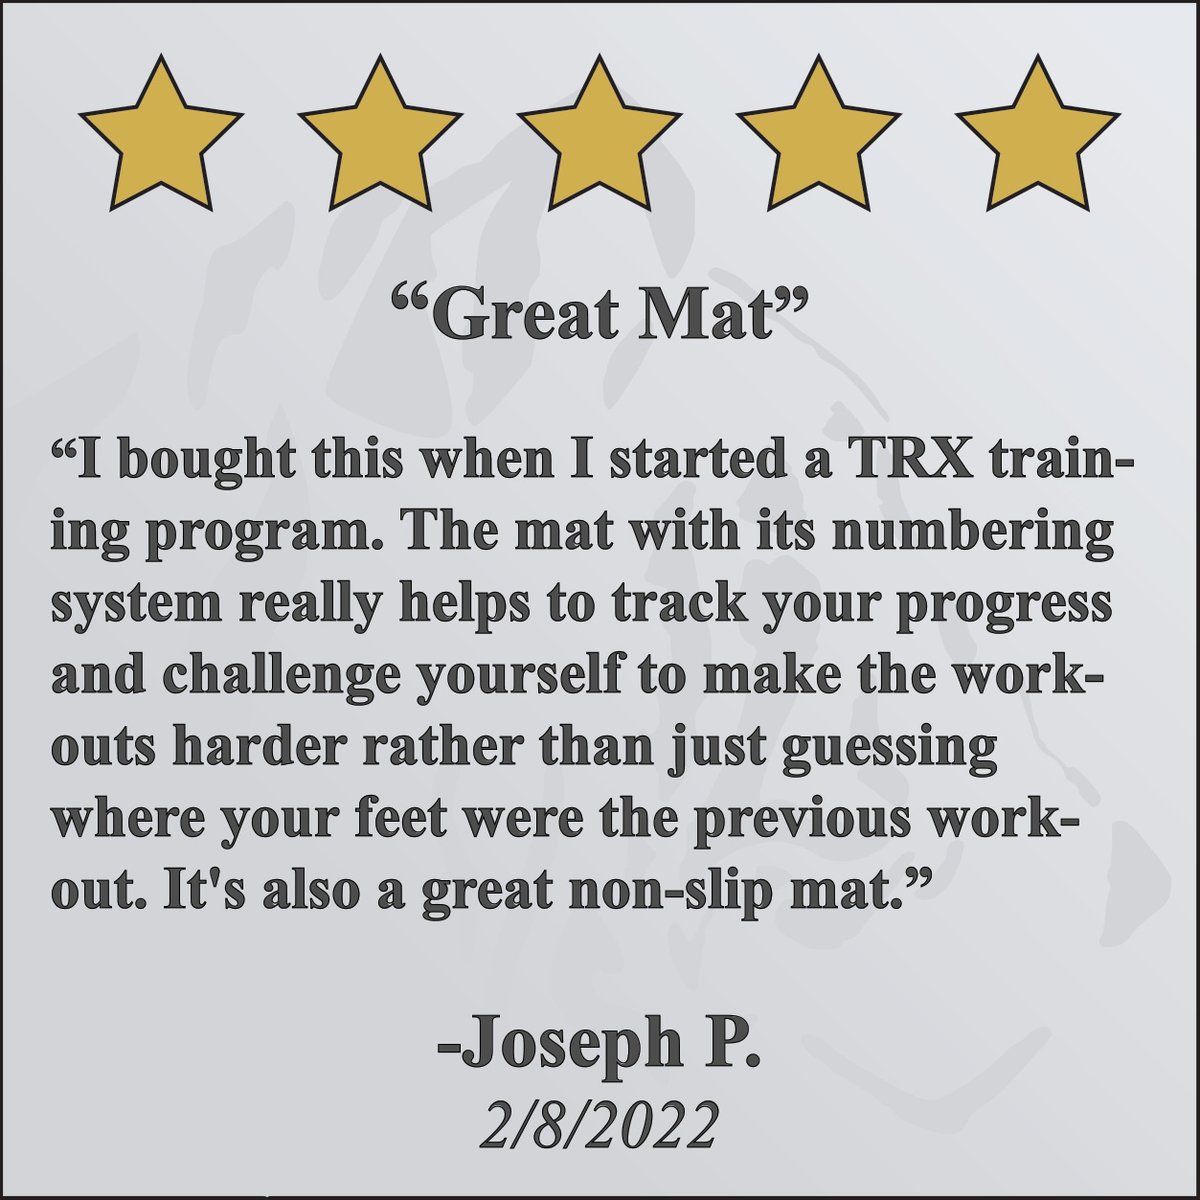 Nothing like seeing a 5-star review! 

To see more reviews and find more information on the Tyger Mat, just go to TygerMat.com

#tygermat  #TRX #trxtraining #suspensiontrainer #trxexercises #trxsuspensiontraining #suspensiontraining #trxfitness #trxsuspensiontrainer